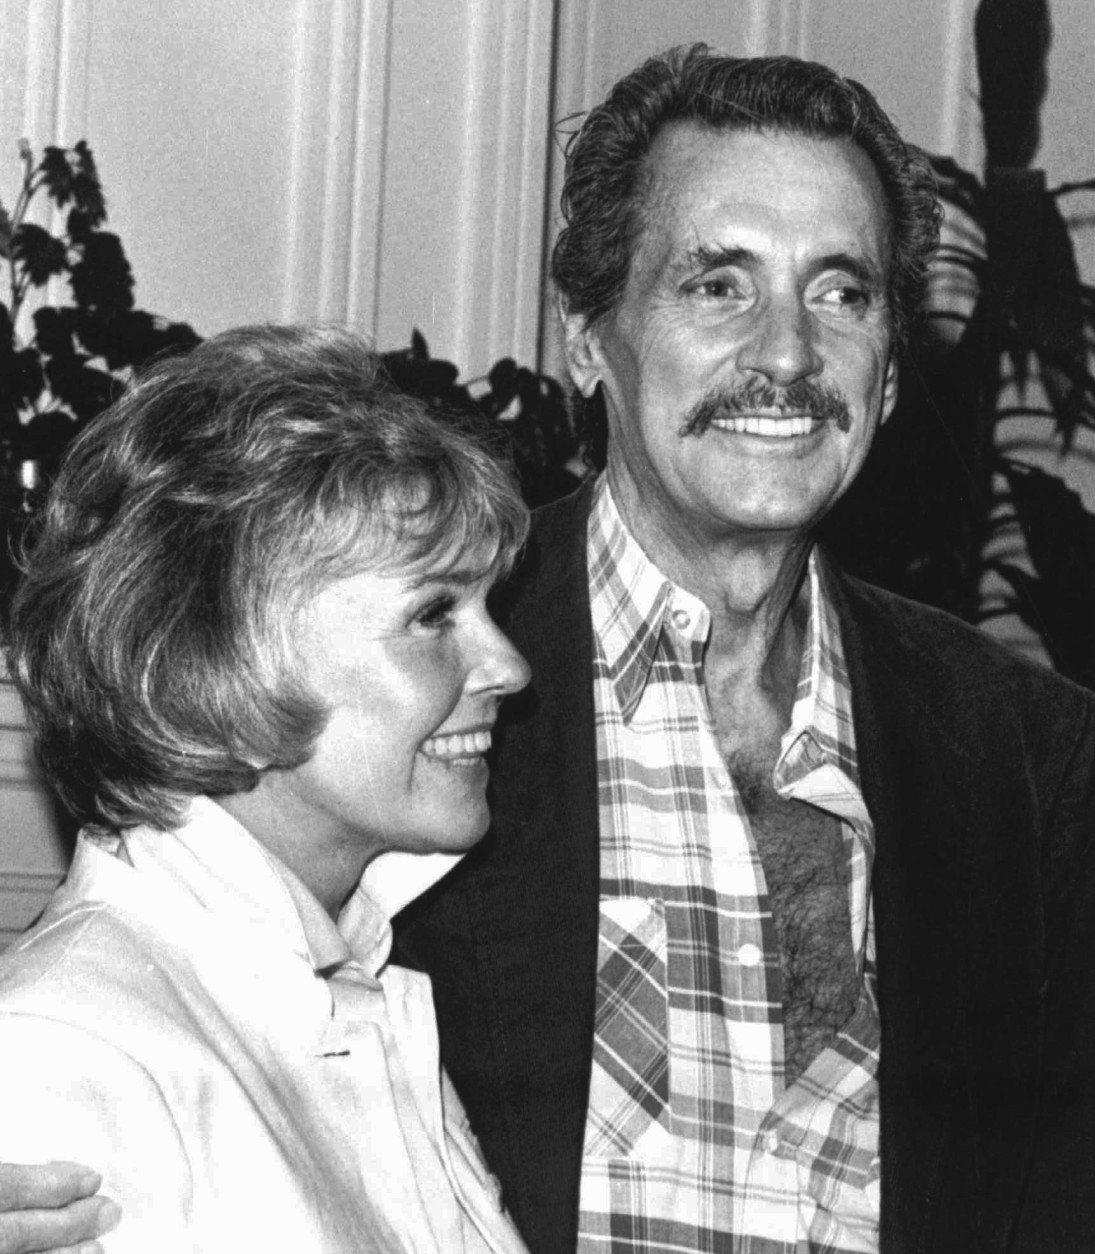 In 1985, a shockingly gaunt Rock Hudson appeared at a news conference with actress Doris Day (it was later revealed Hudson was suffering from AIDS). (AP)